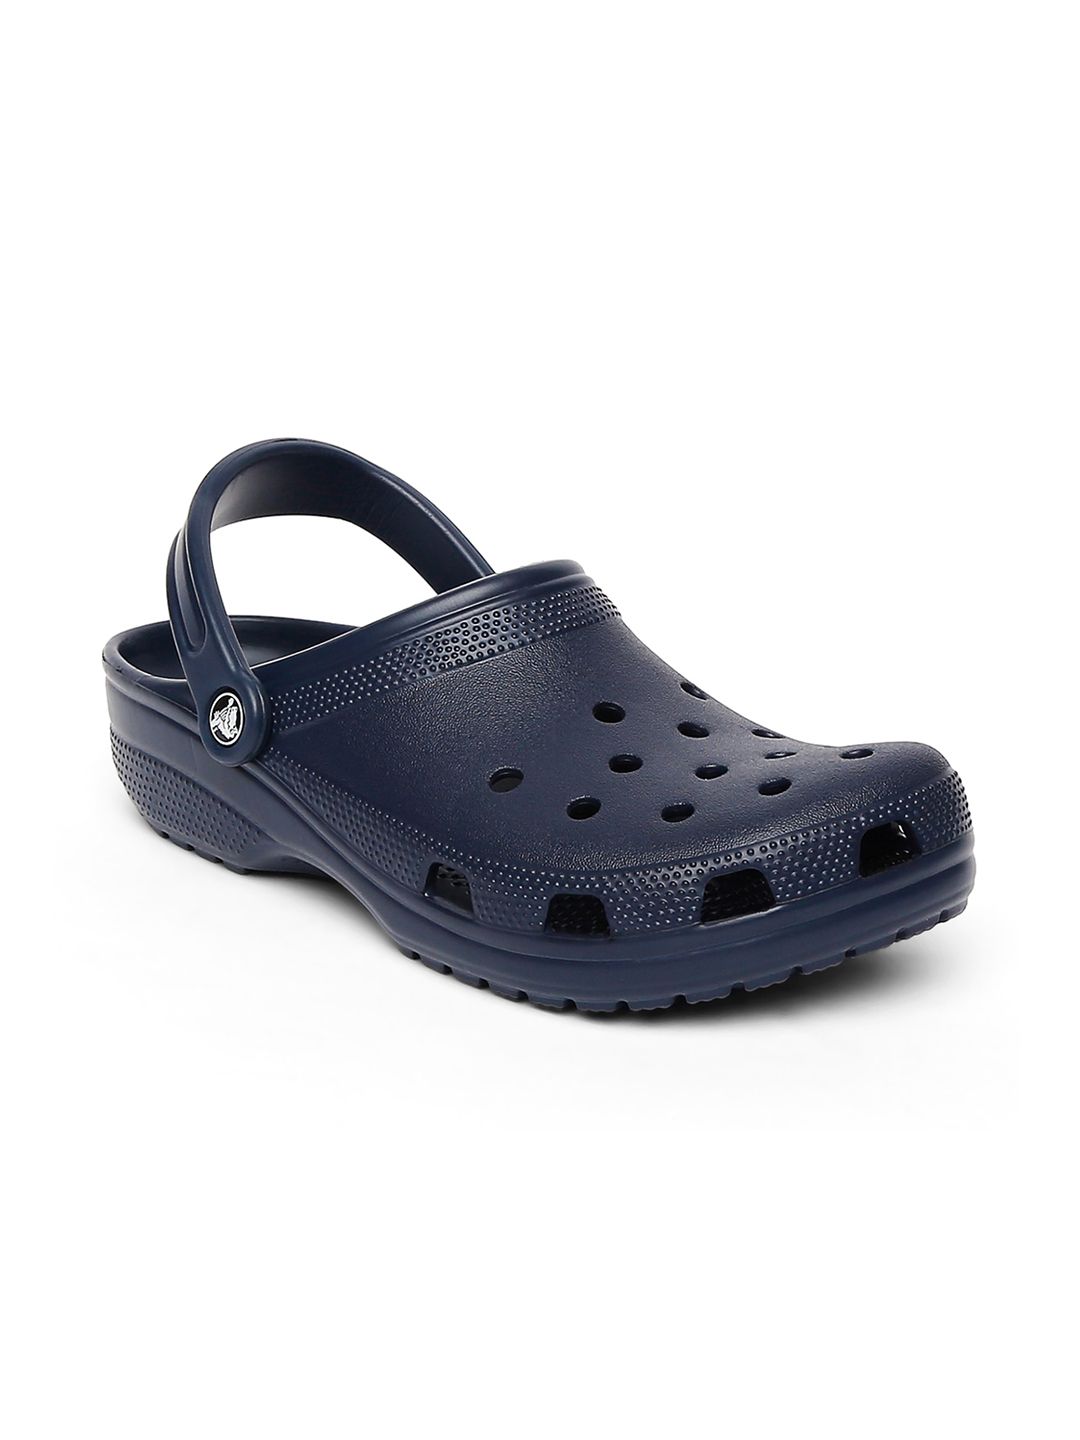 Crocs Unisex Navy Blue Solid Clogs Price in India